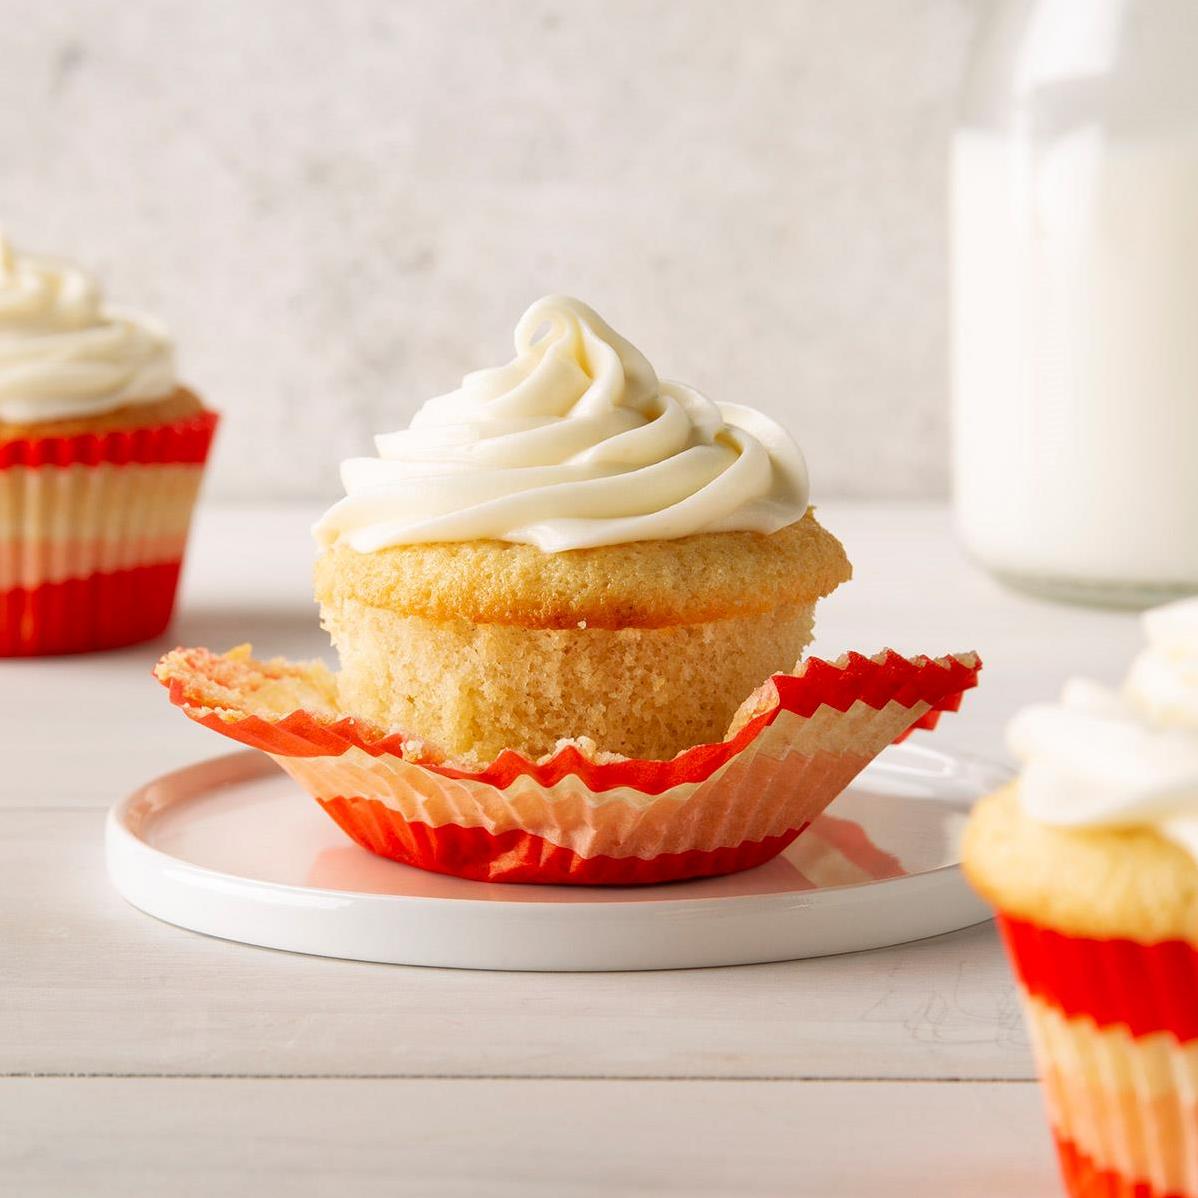  Moist and flavorful, these cupcakes will impress even non-gluten-free eaters.